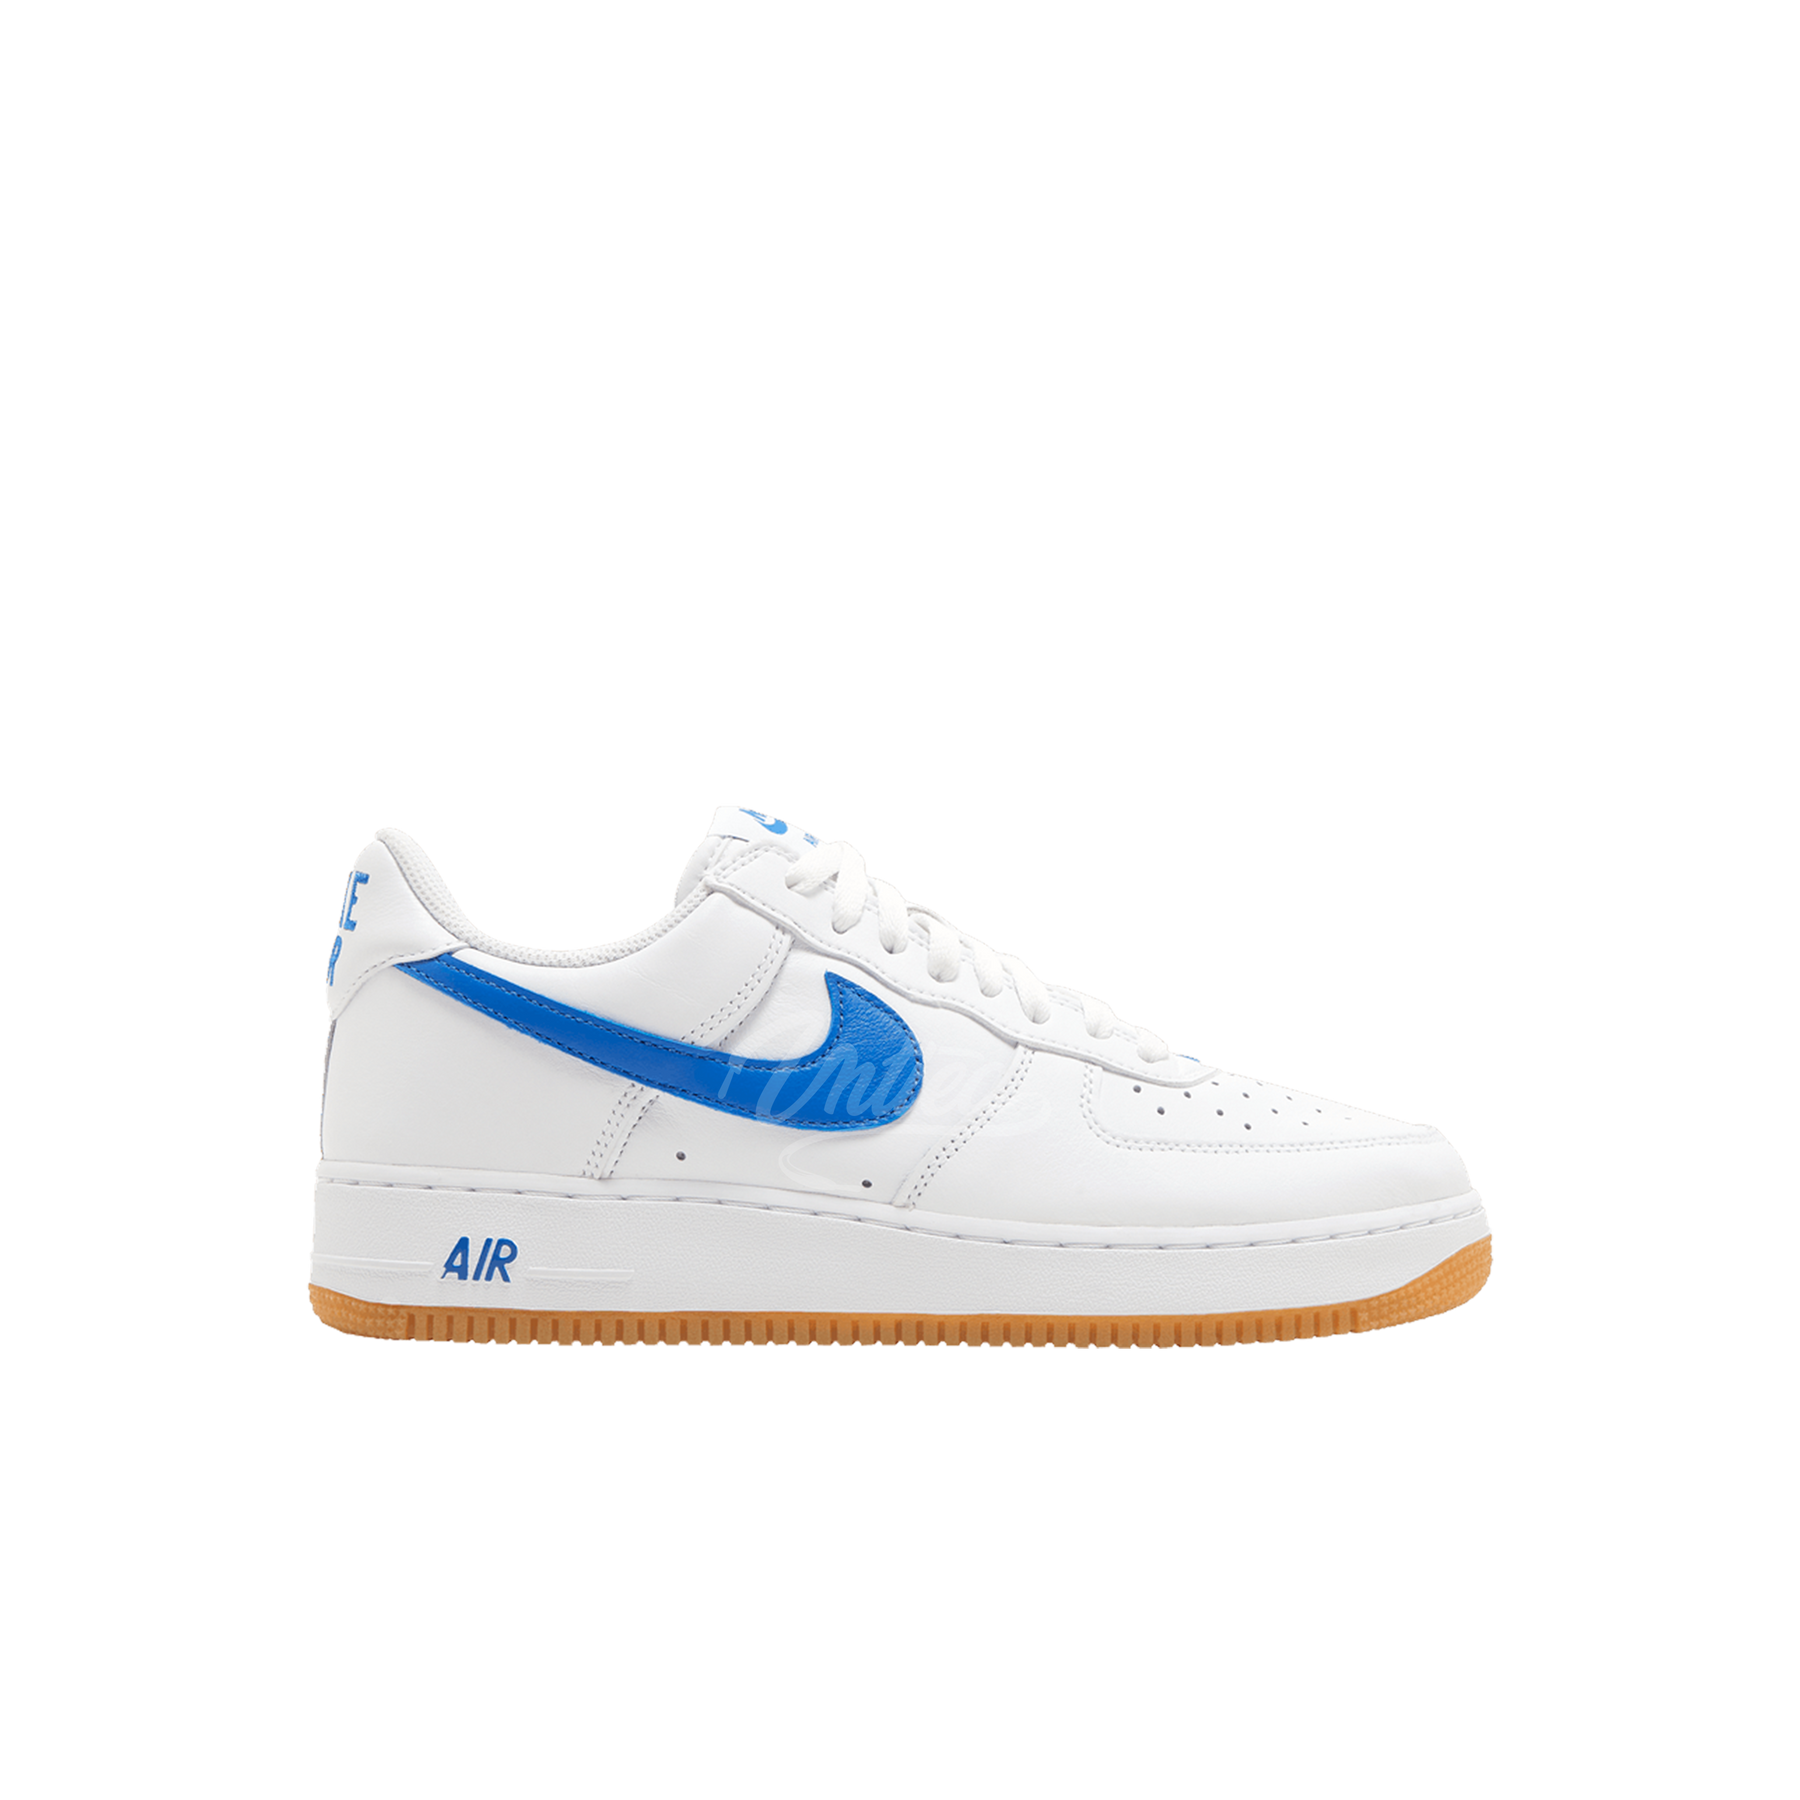 Air Force 1 Color of the Month "Varsity Royal/Gum"